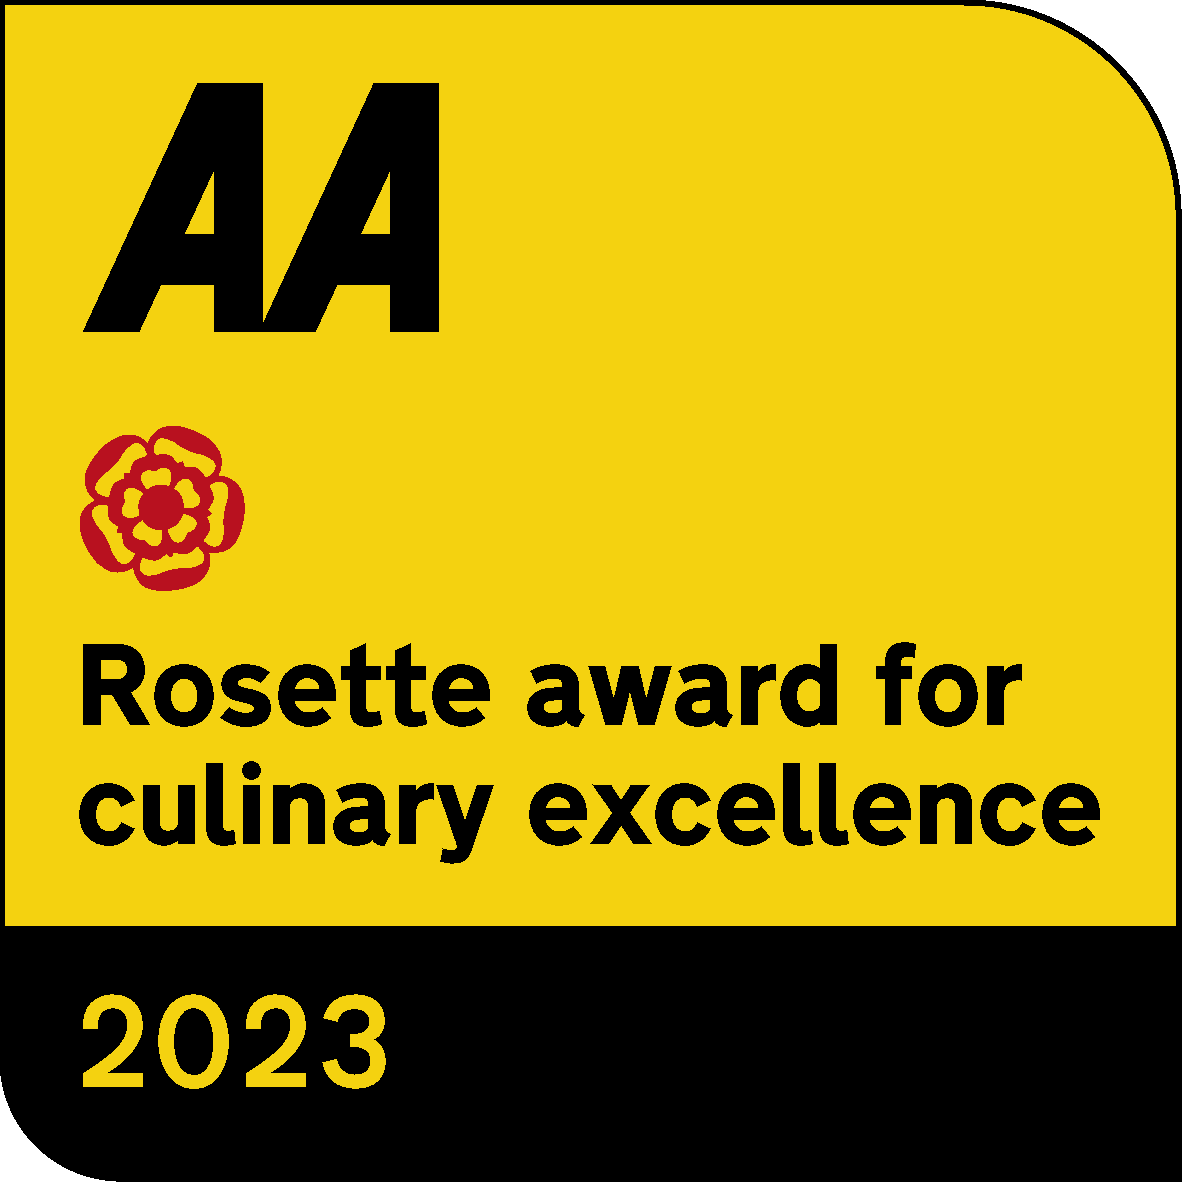 1 Rosette Award for Culinary Excellence